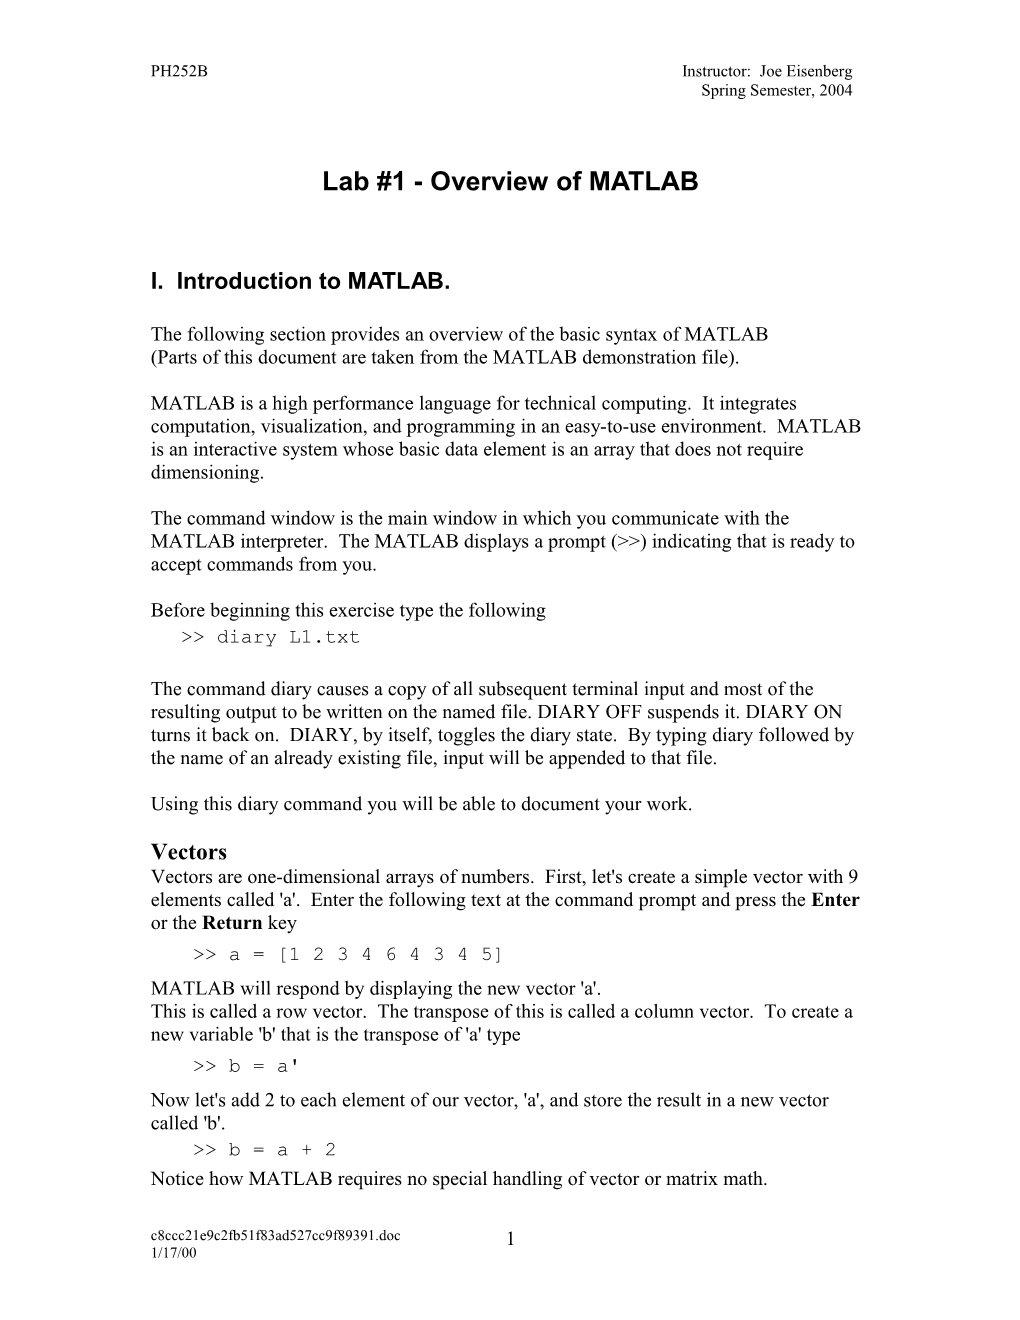 'Intro'	Introduction to MATLAB